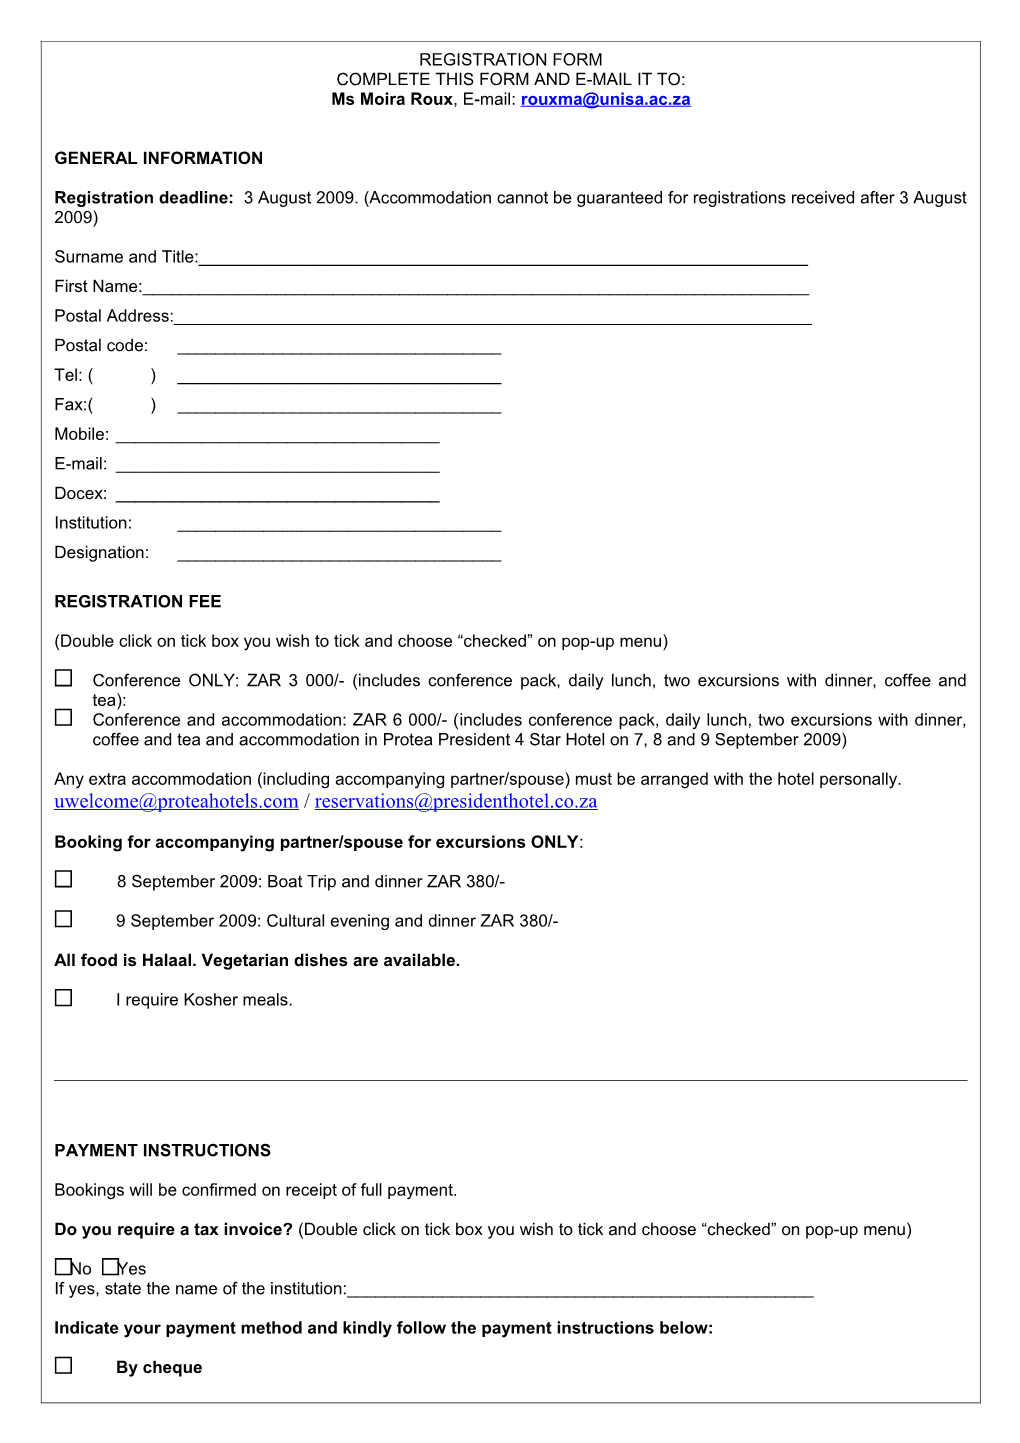 Complete This Form and E-Mail It To